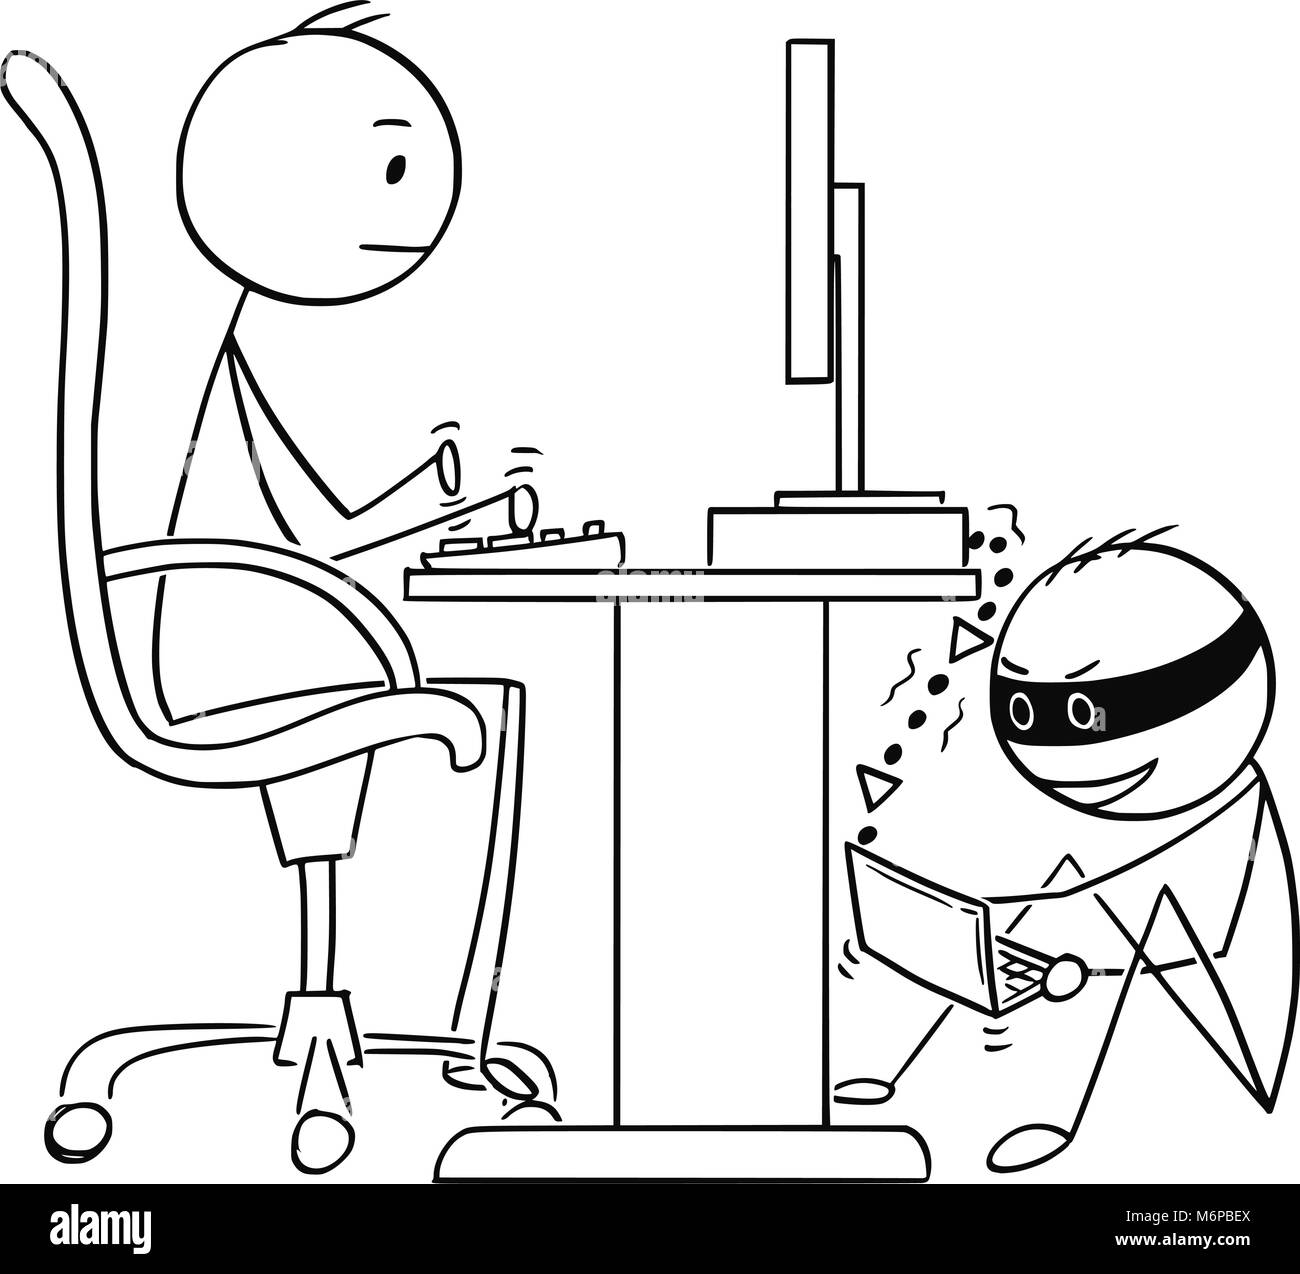 Cartoon of Man or Businessman Working on Computer While Hacker is Stealing His Data Stock Vector